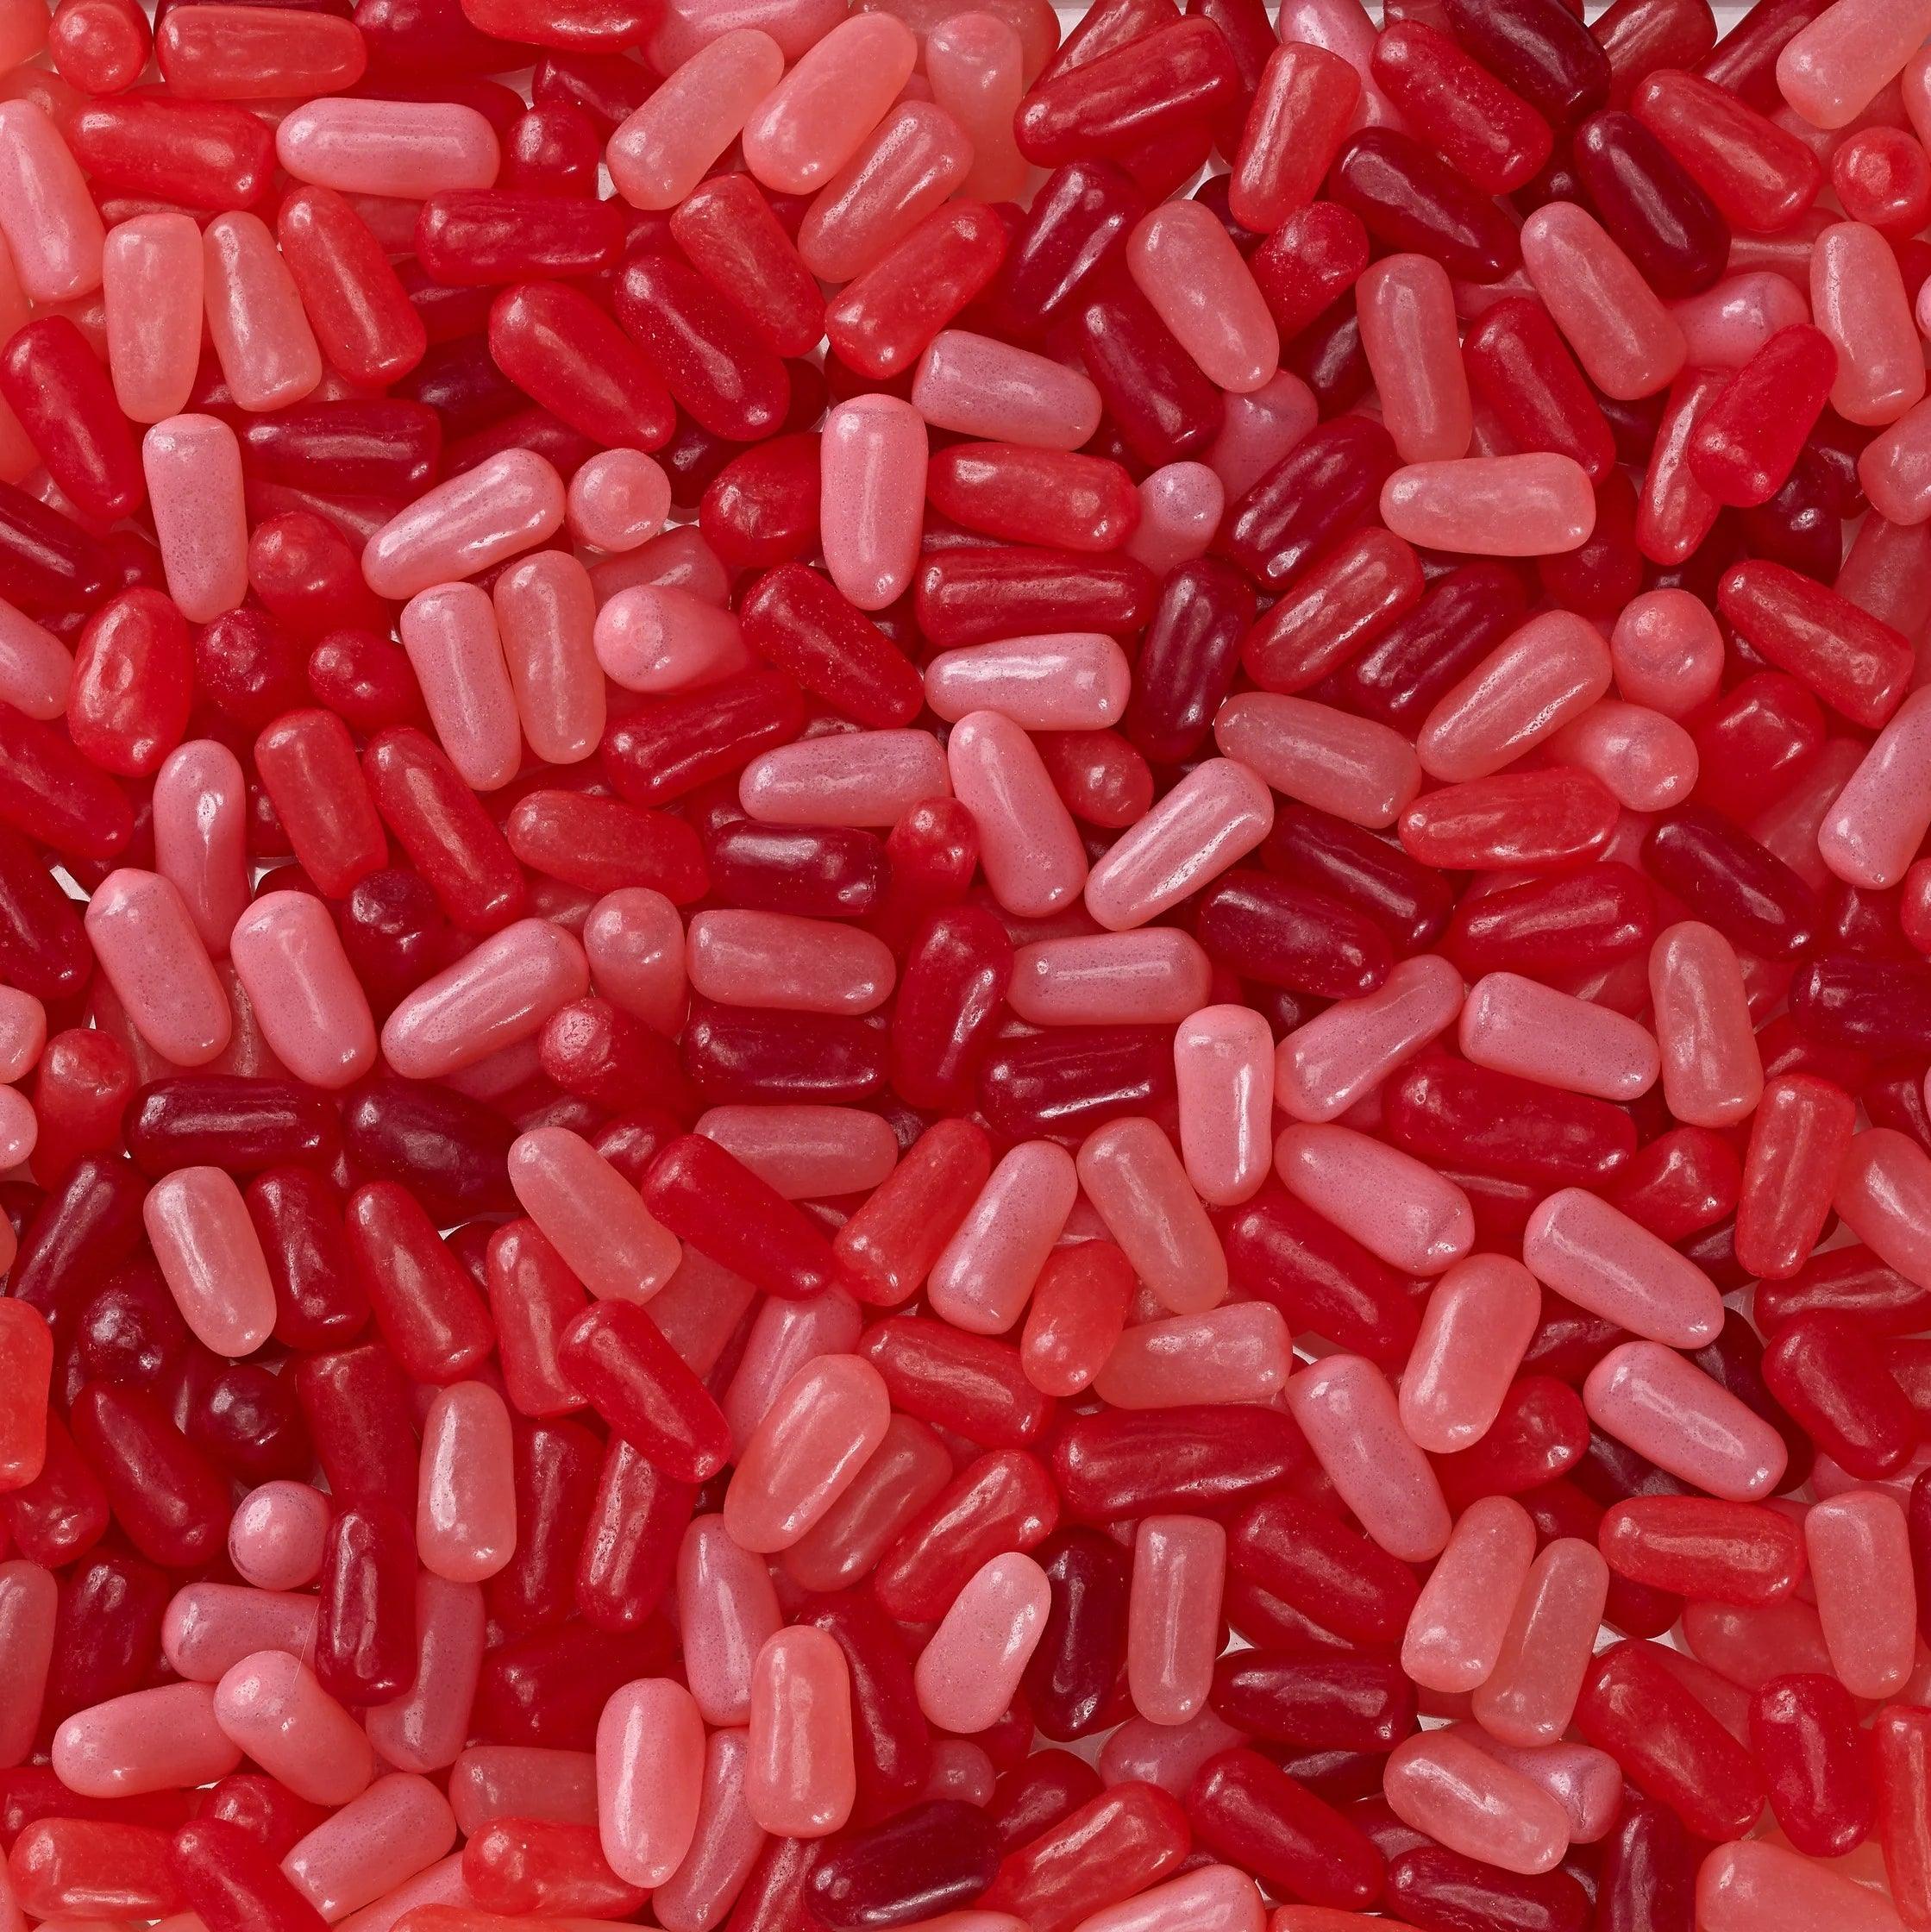 Mike and Ike RedRageous - FragFuel